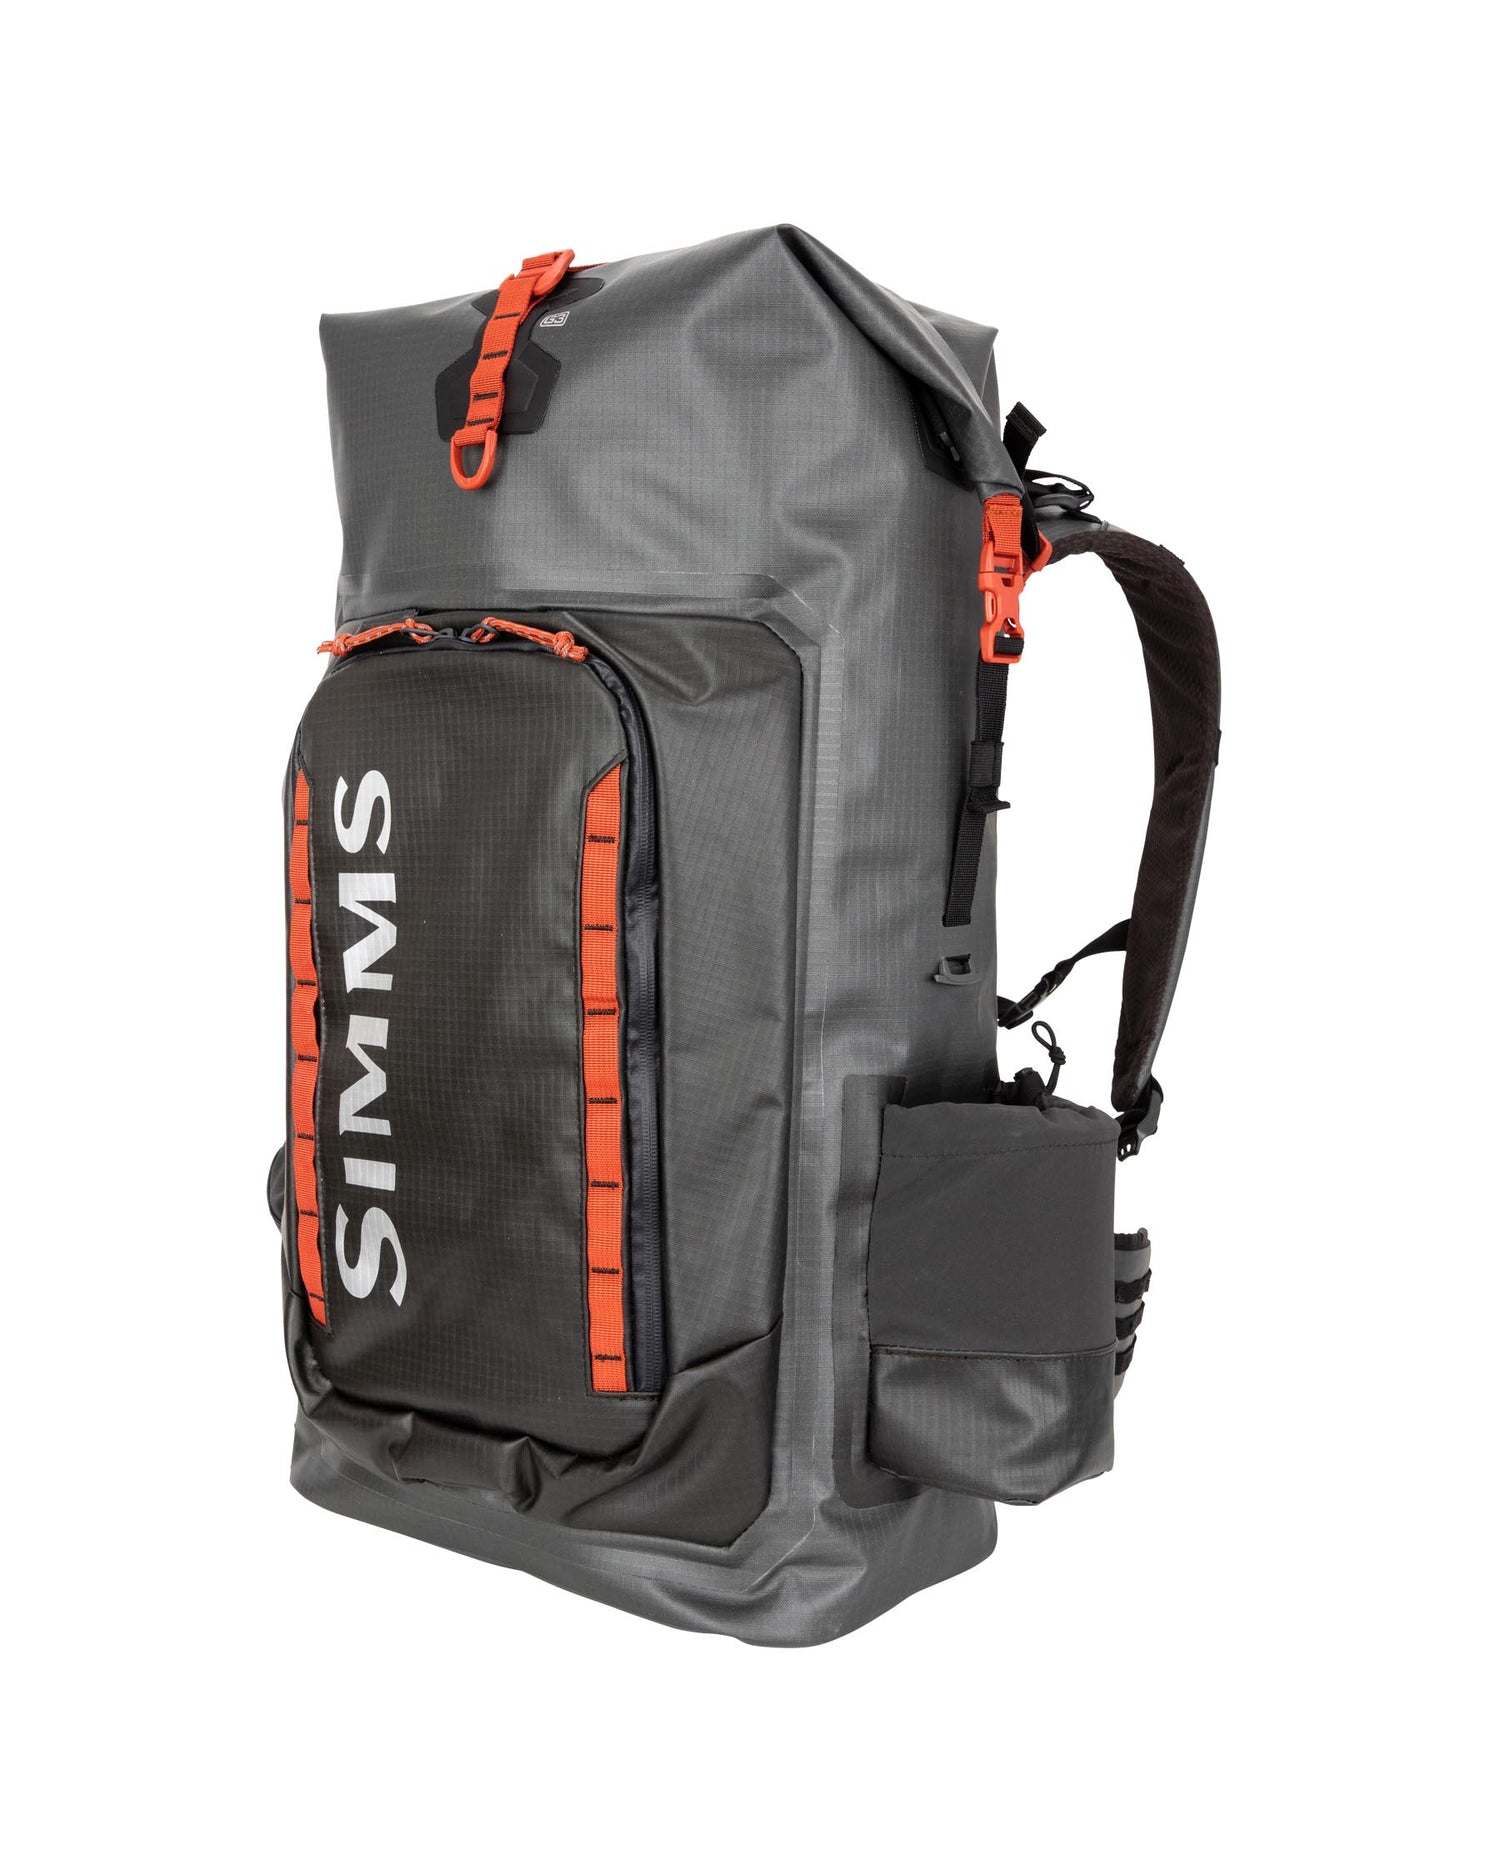 G3 Guide Backpack  Simms Fishing Products